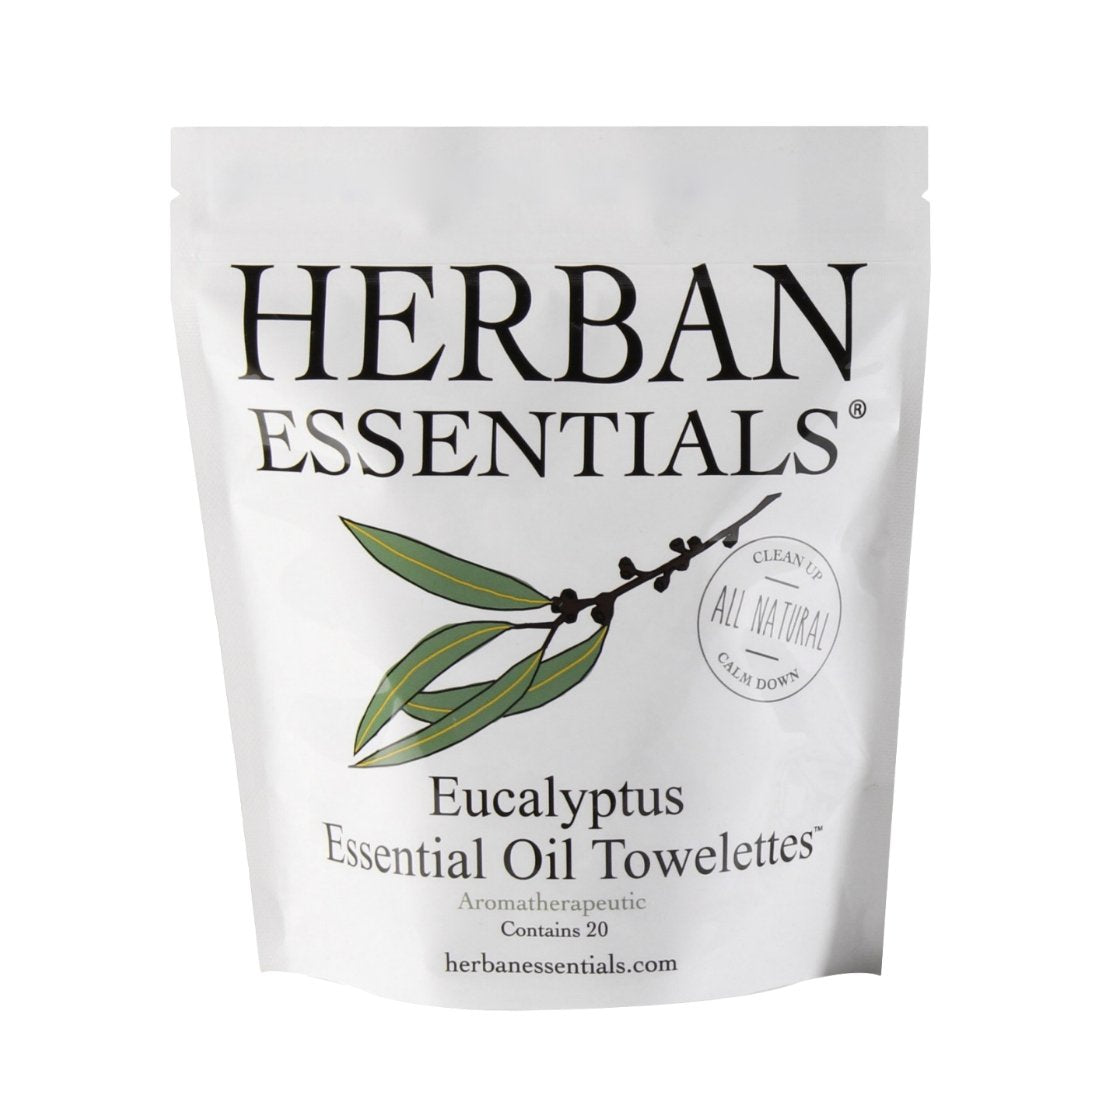 A white pouch labeled "Herban Essentials Essential Oil Towelettes - Eucalyptus" with a graphic of a eucalyptus branch, featuring text indicating all-natural ingredients and containing.